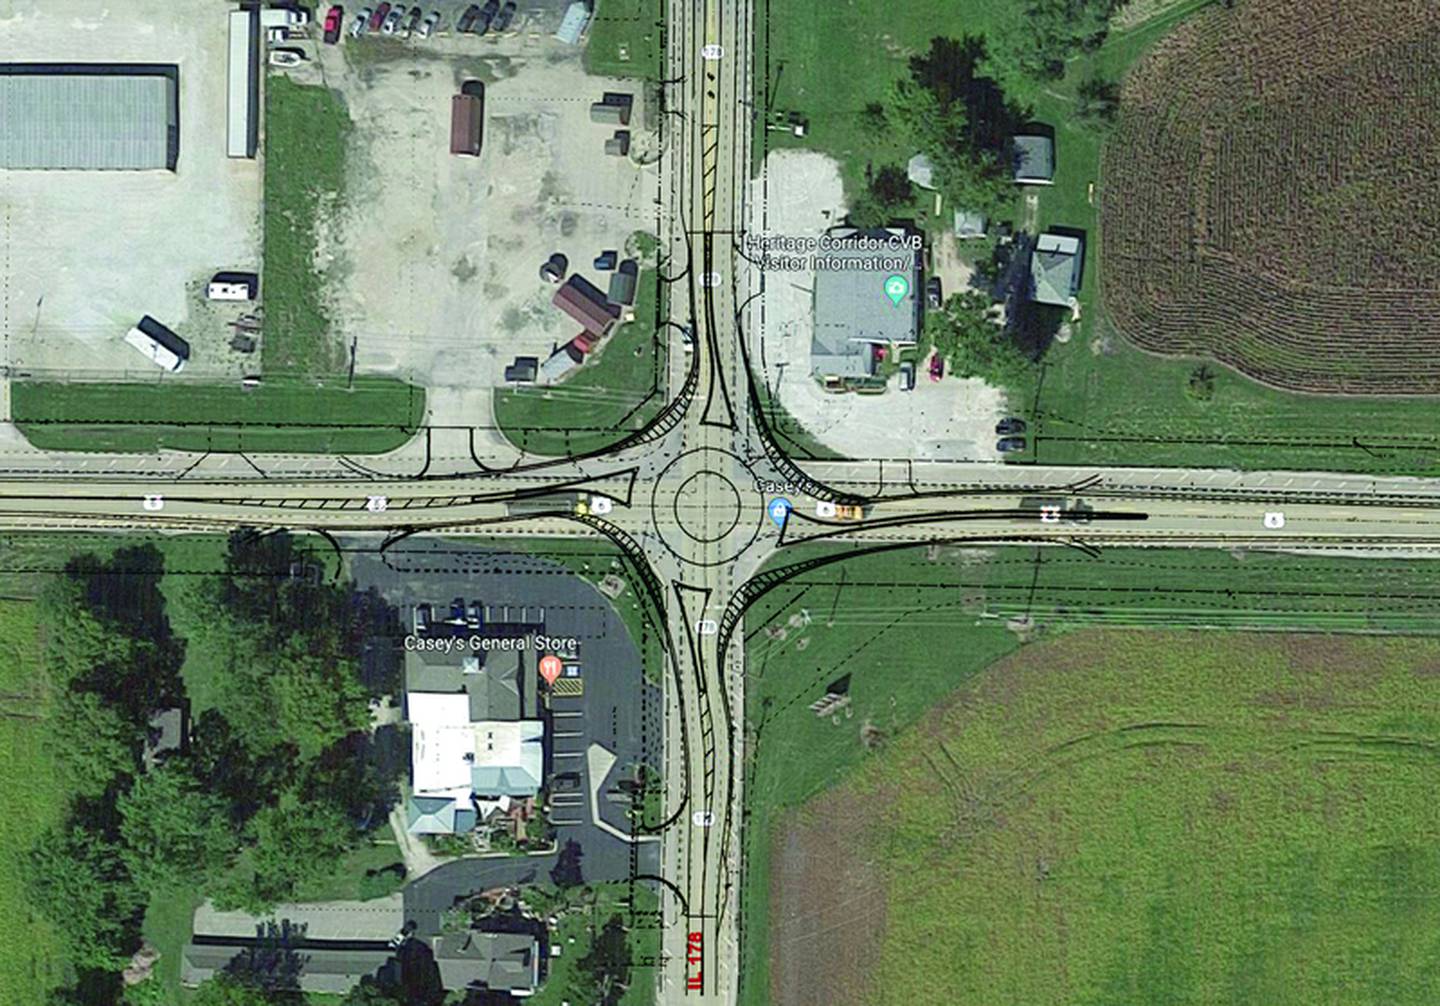 Utica officials are clear: The proposed roundabout will be big enough to handle large vehicles and 18-wheelers. This graphic shows IDOT’s design (in dark black lines) overlaying a satellite image of the four corners. The roundabout is a project of the Illinois Department of Transportation but the village has given its OK because a long-term traffic solution at the junction of U.S. 6 and Route 178 has been a key objective in Utica’s comprehensive plan.